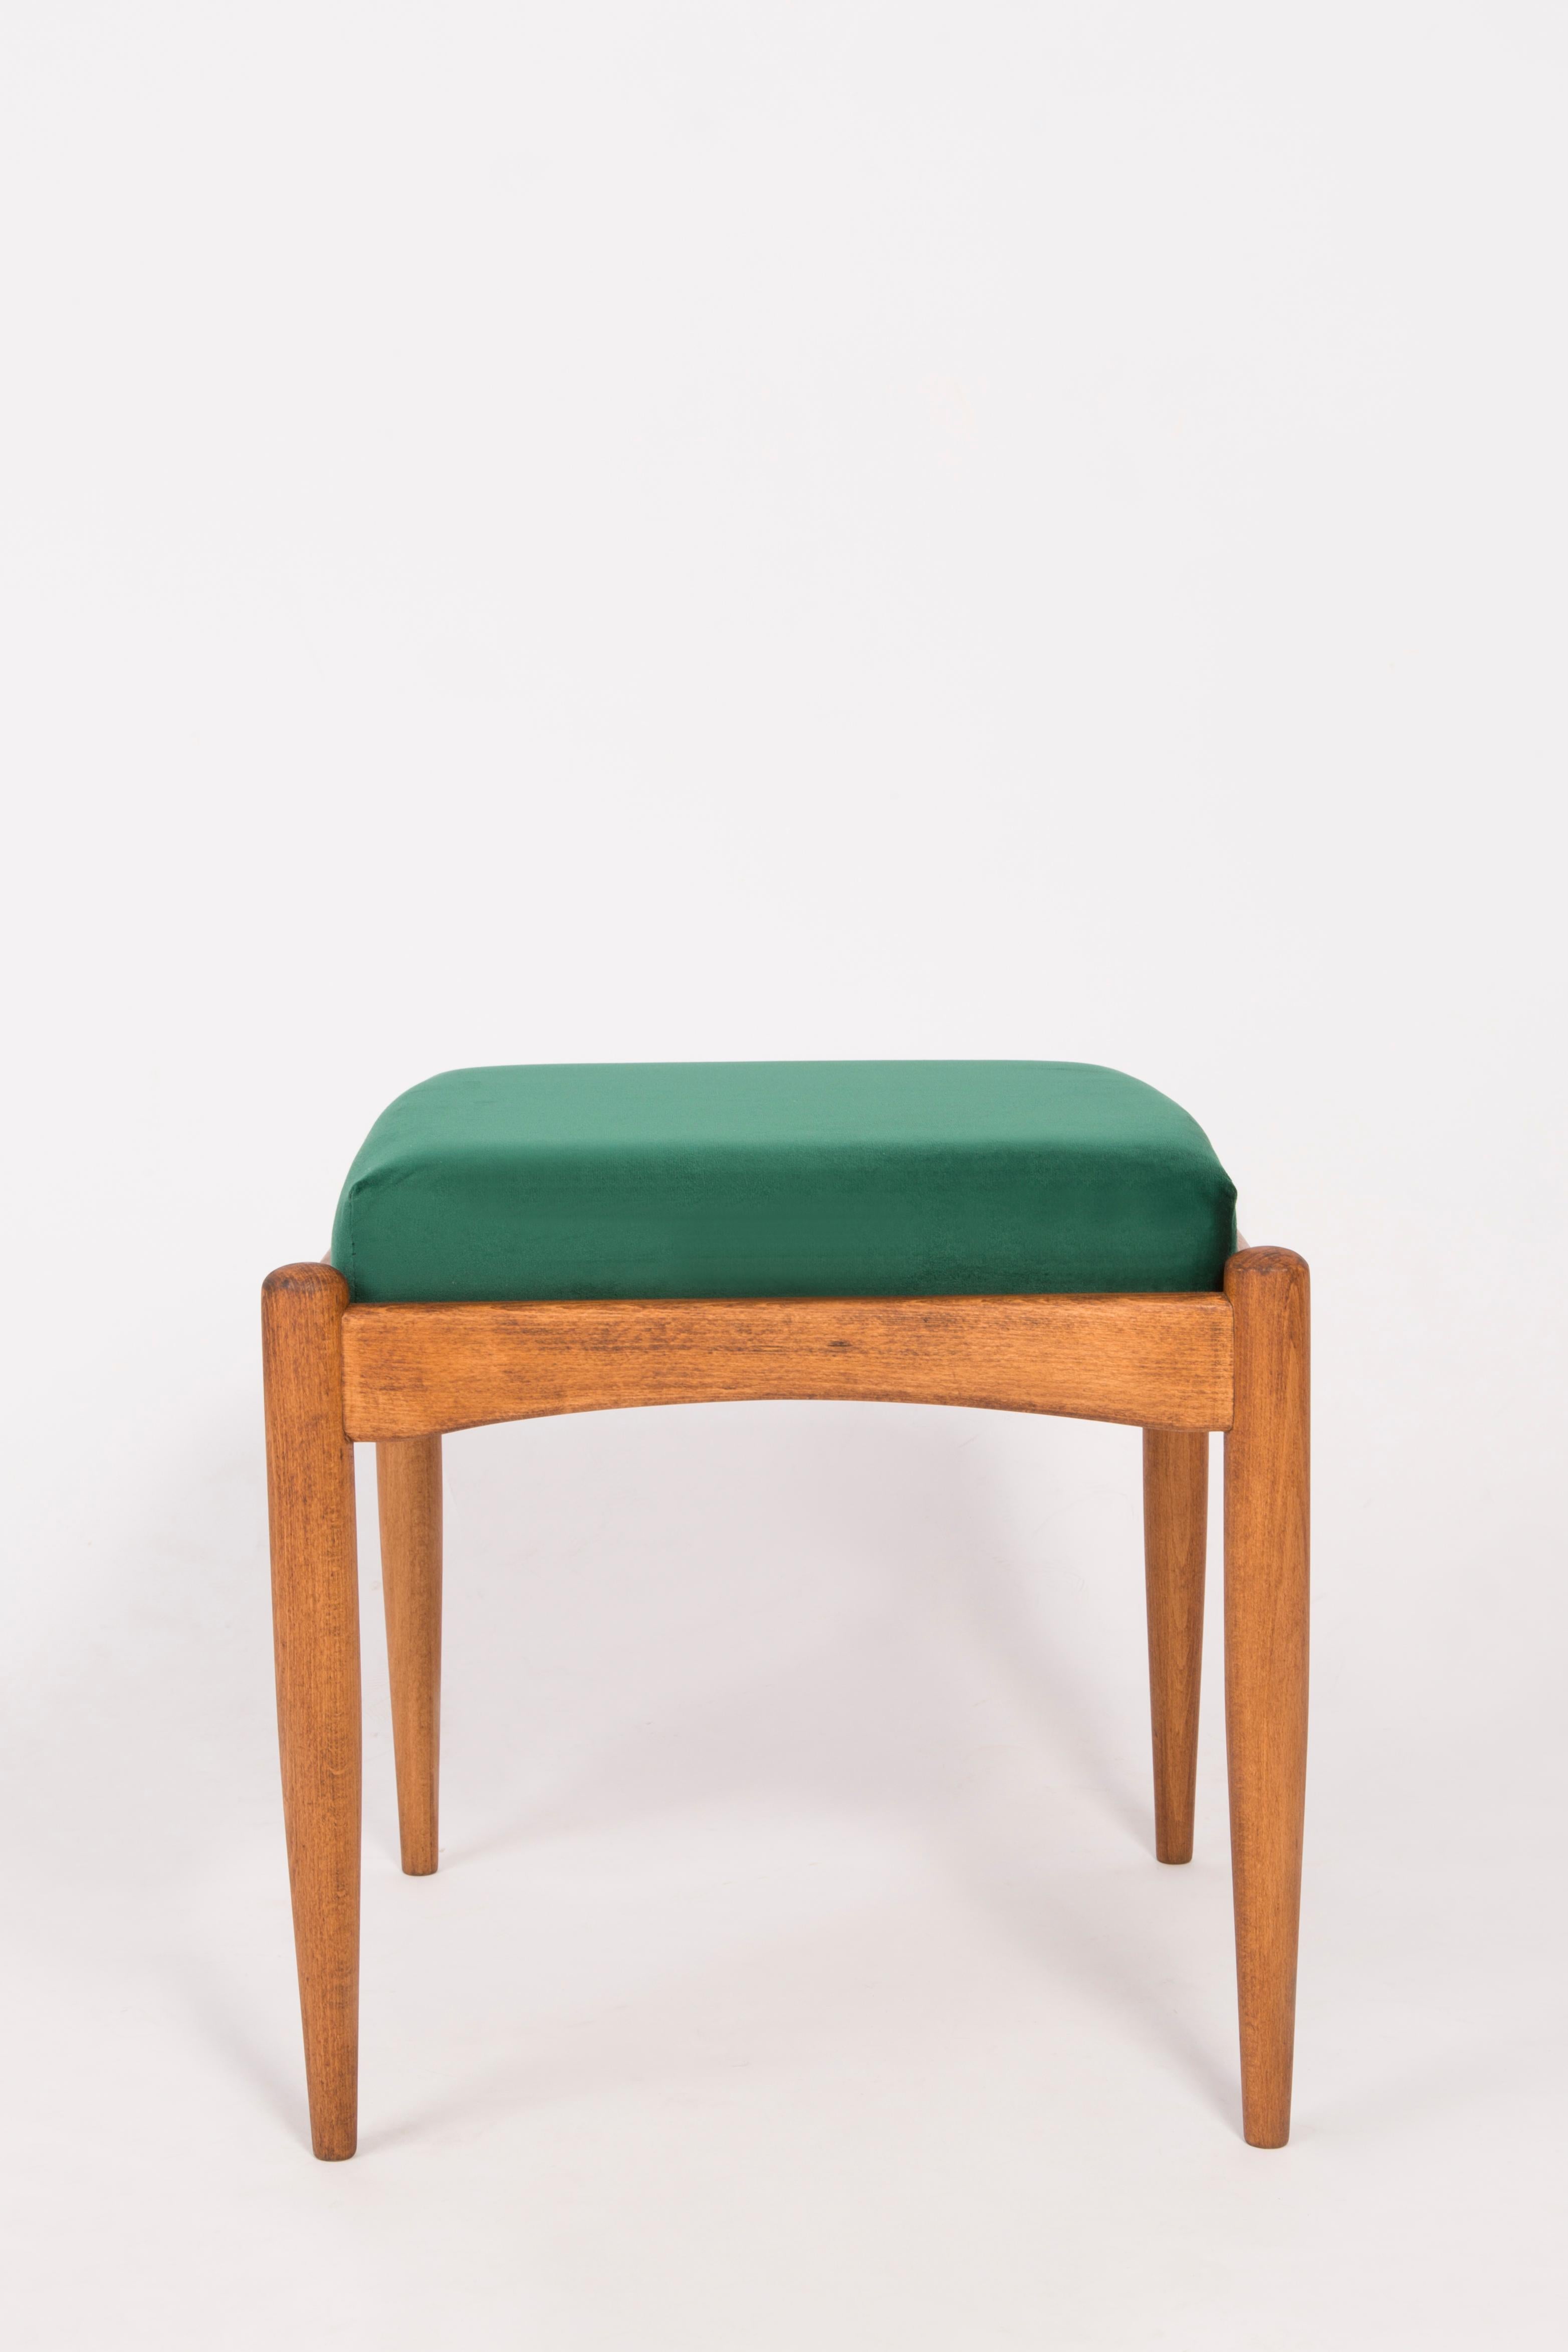 Set of Two 20th Century Green Stools, 1960s For Sale 1